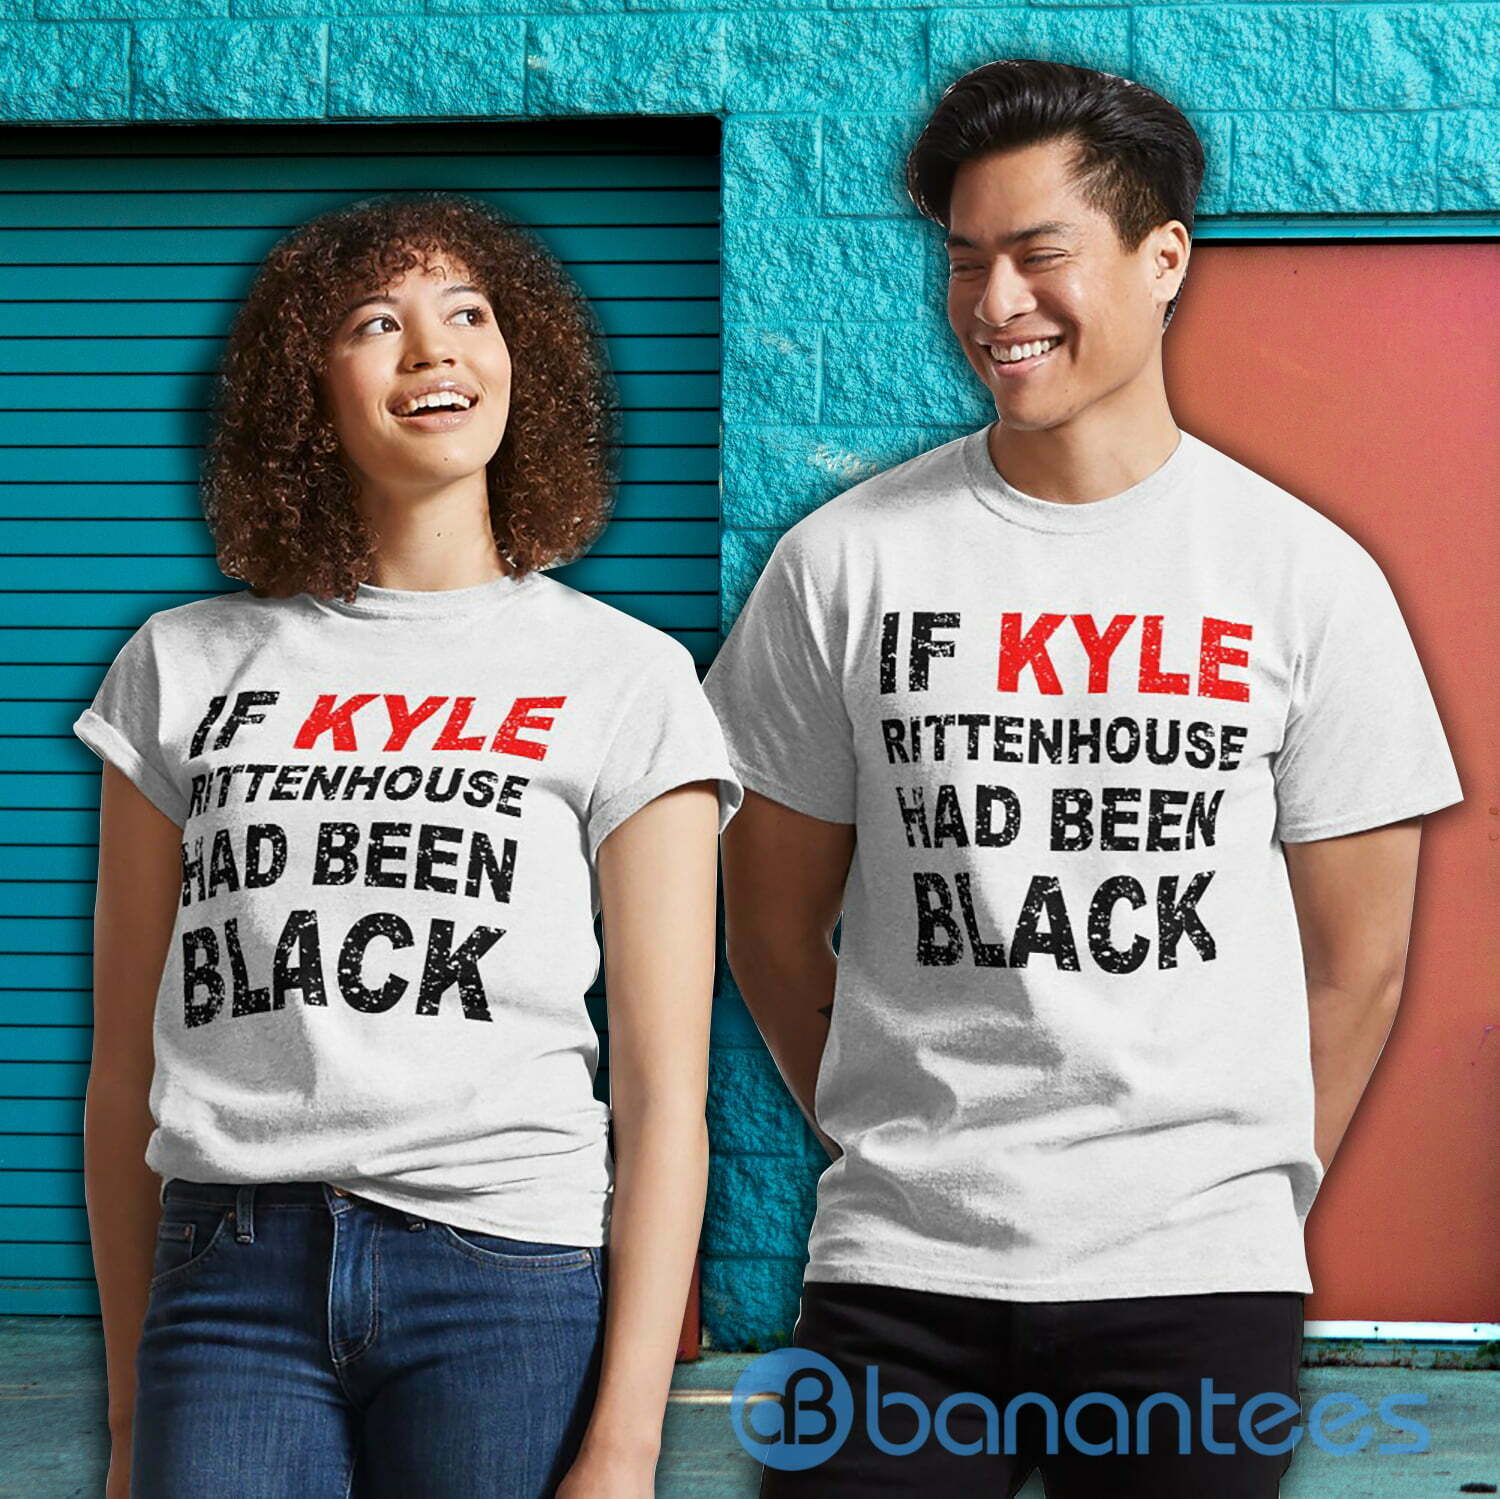 Printed T-Shirts For Kyle Rittenhouse Supporters Of Innocence And Justice To Be Done